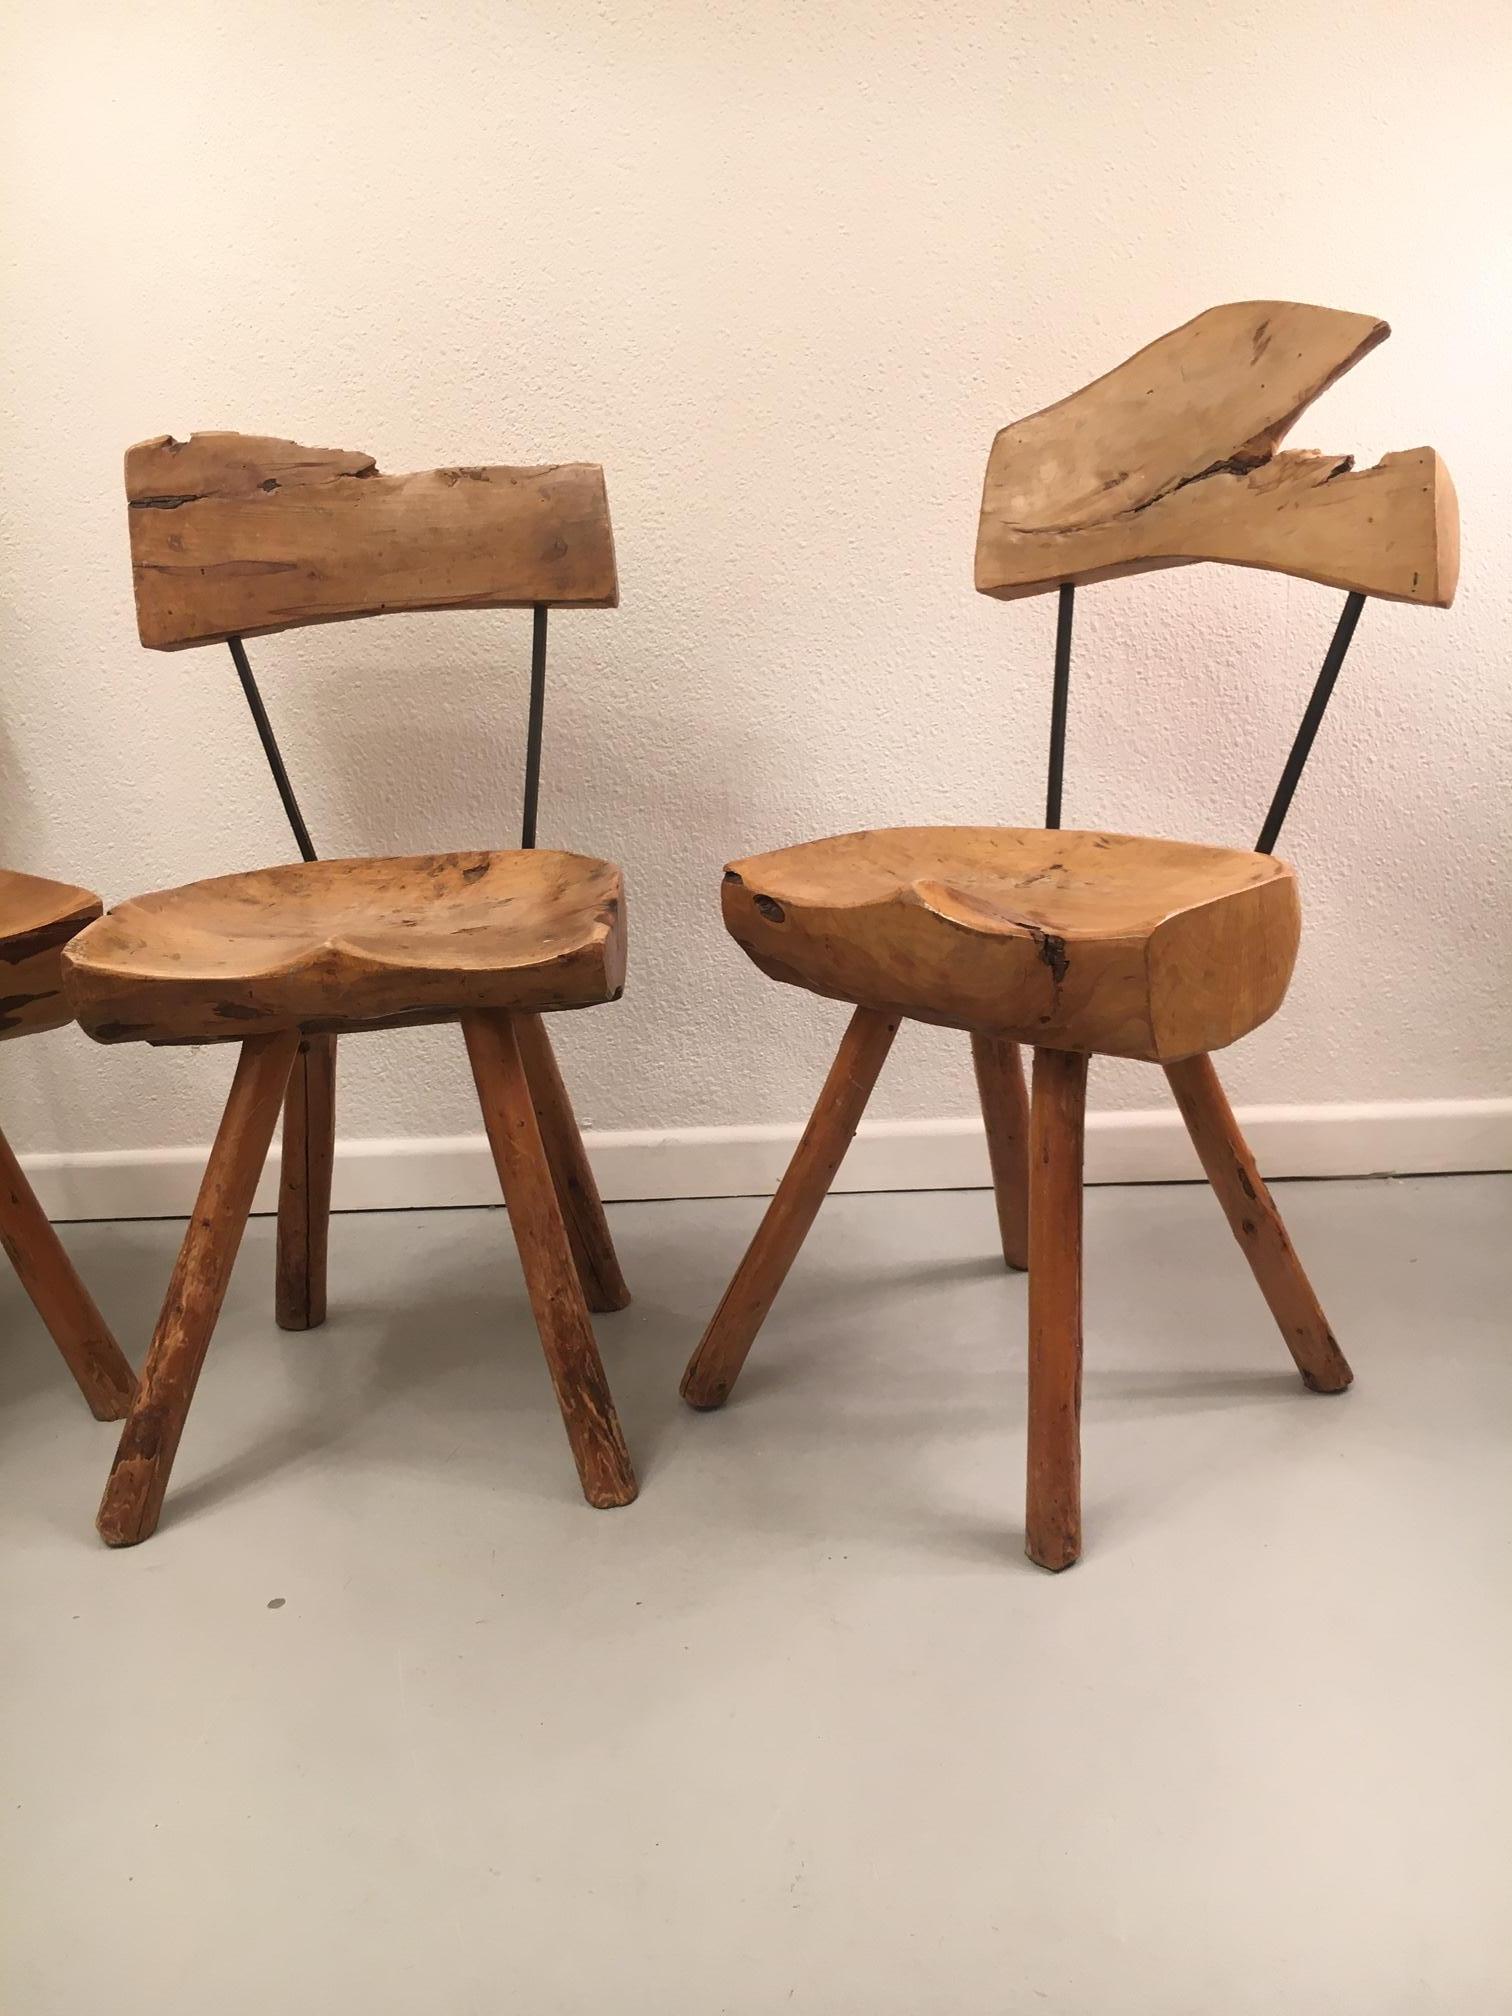 Set of 5 Solid Olive Wood Brutalist Rustic Dining Chairs, circa 1950s For Sale 1